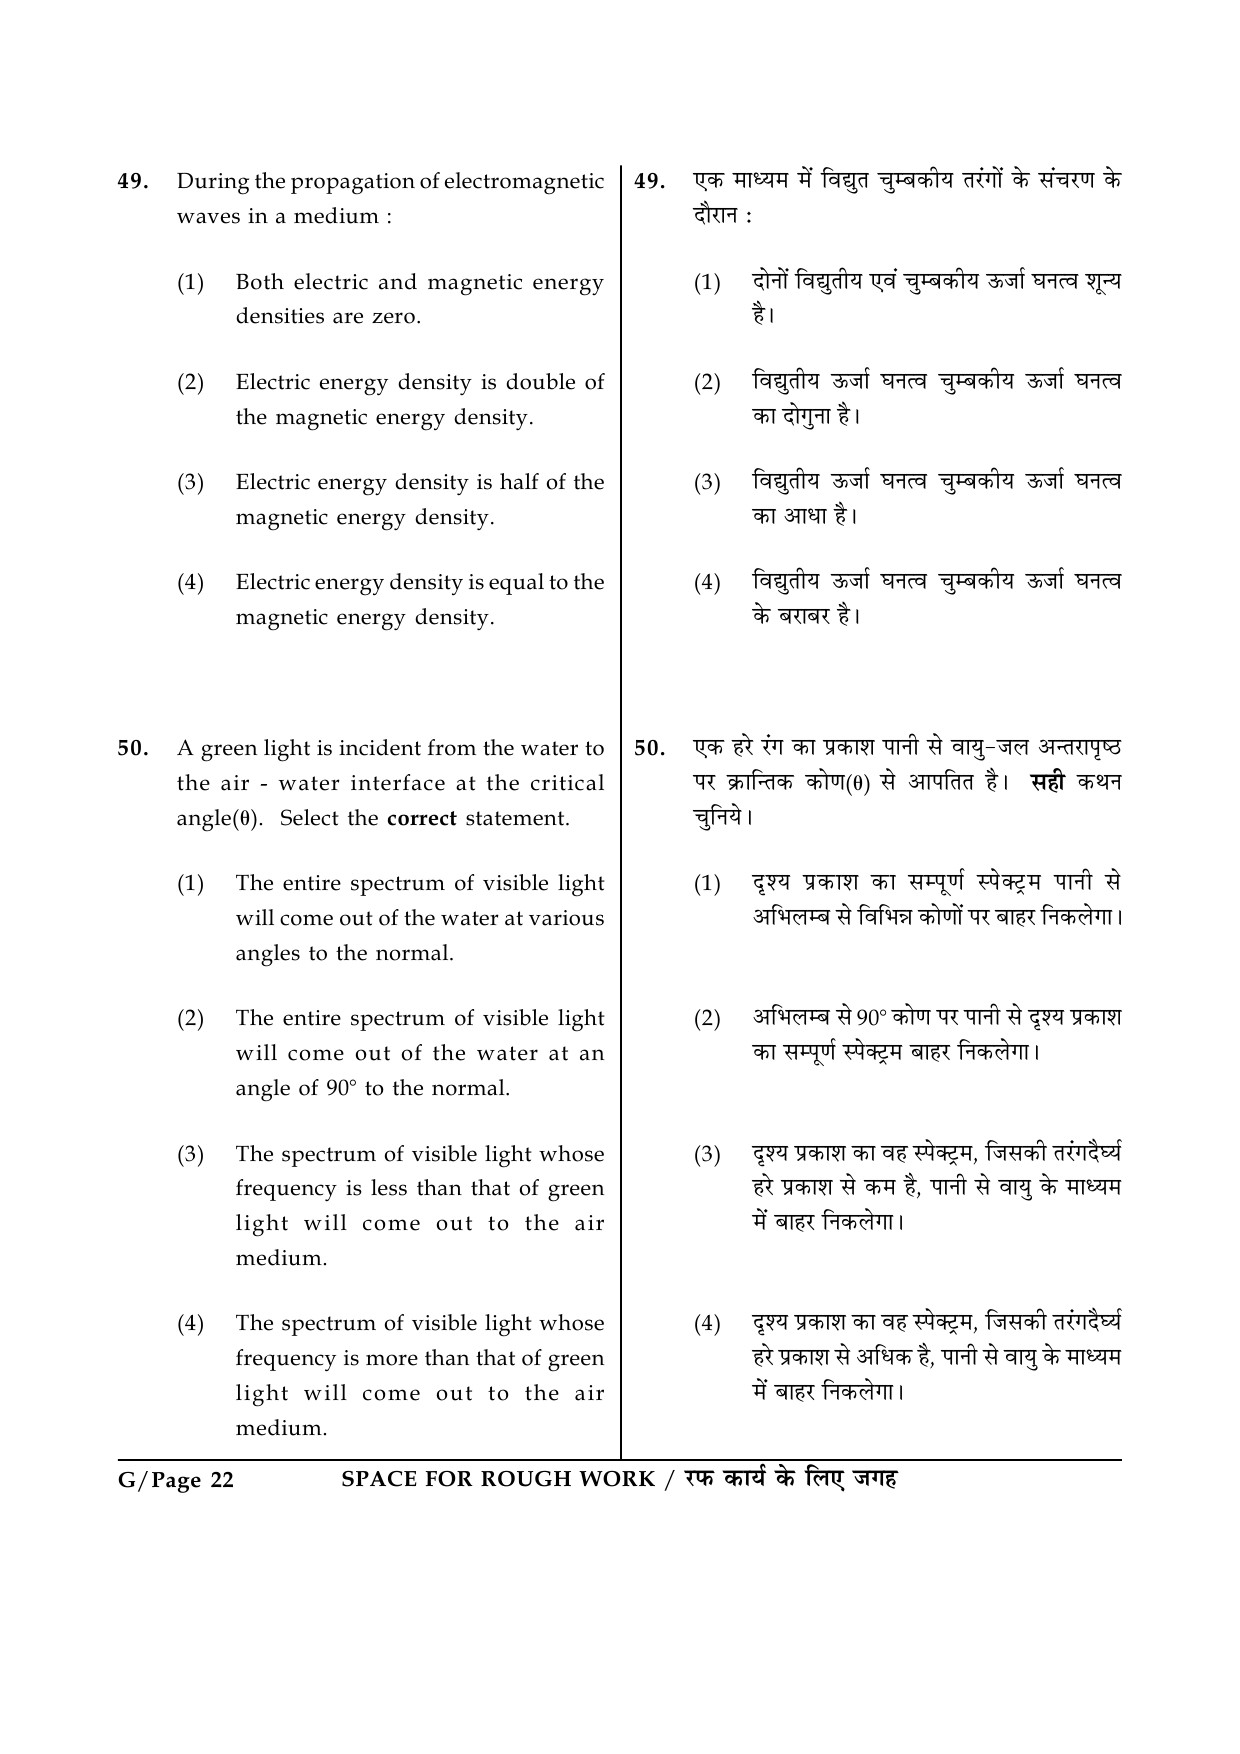 JEE Main Exam Question Paper 2014 Booklet G 22